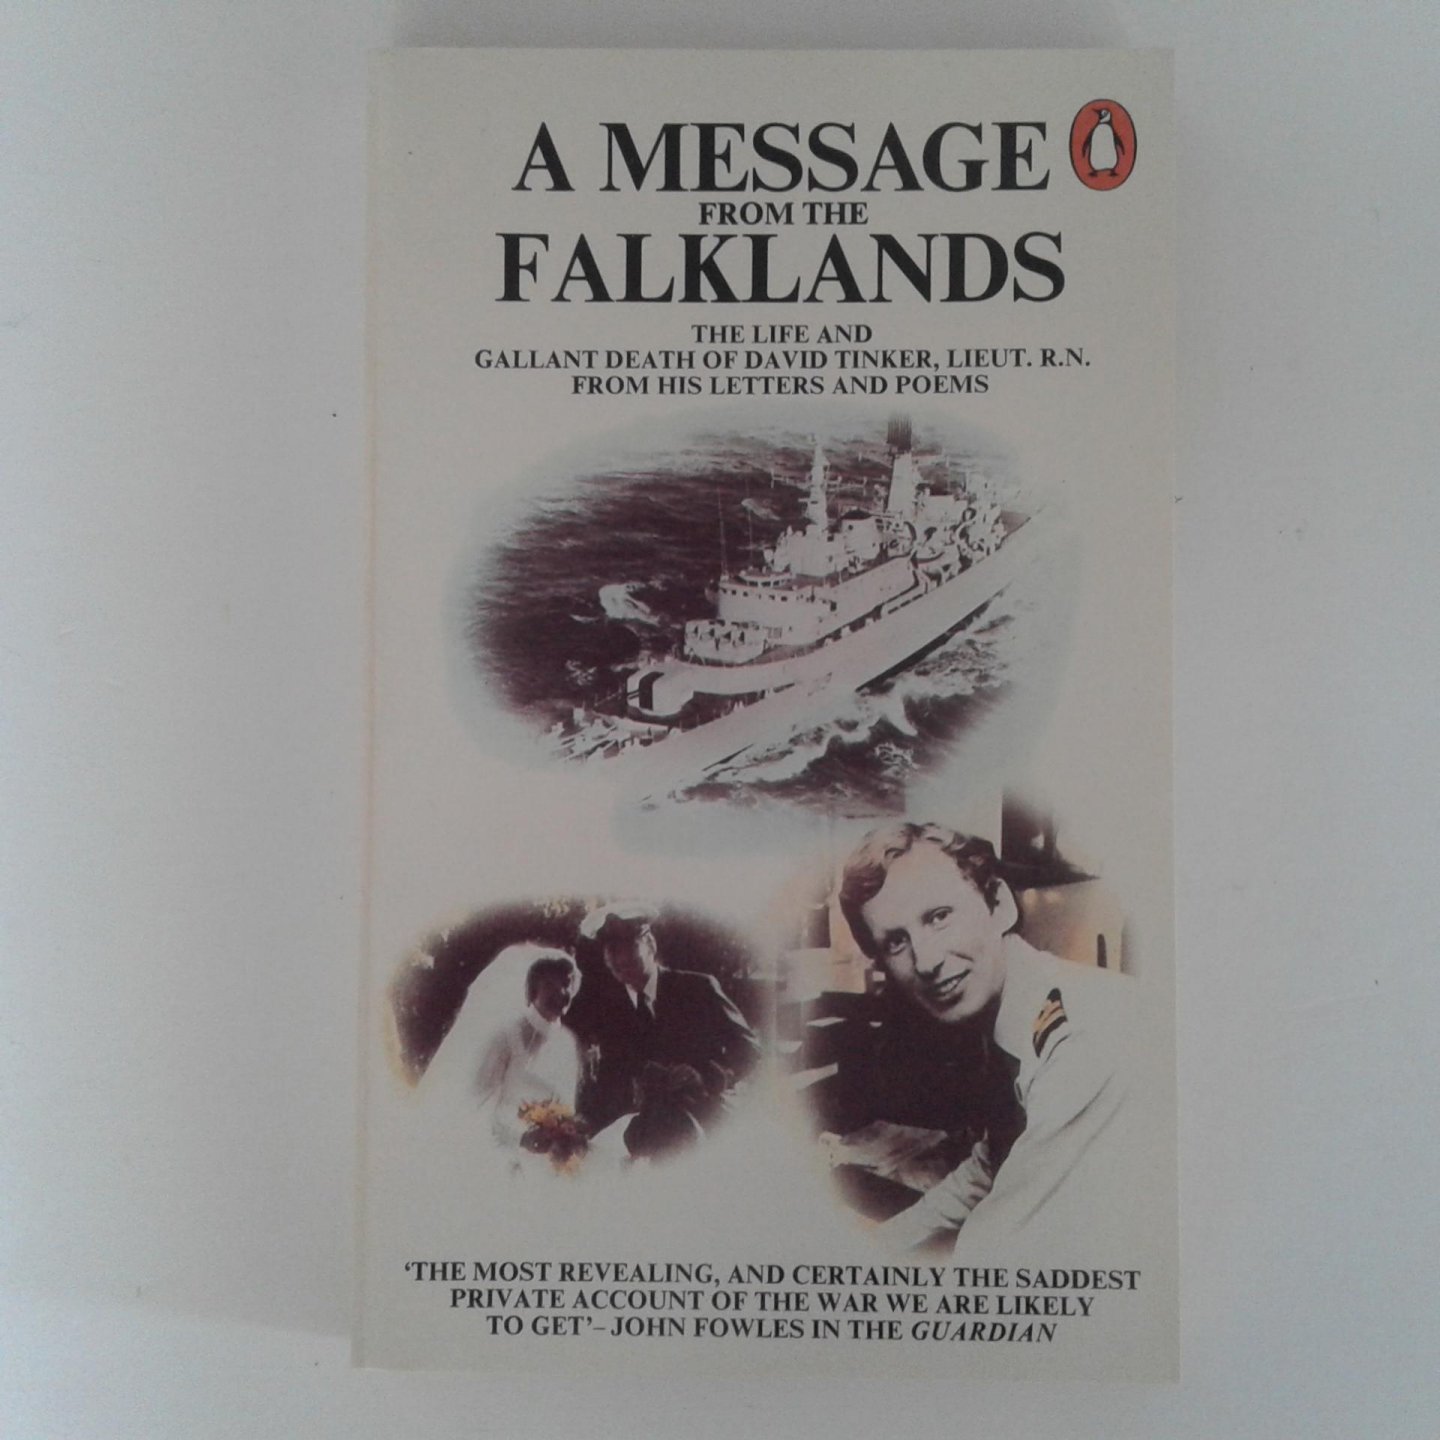 Tinker, Hugh - A Message from the Falklands ; The life and gallant death of David Tinker, Lieut. R.N. ; From his letters and poems